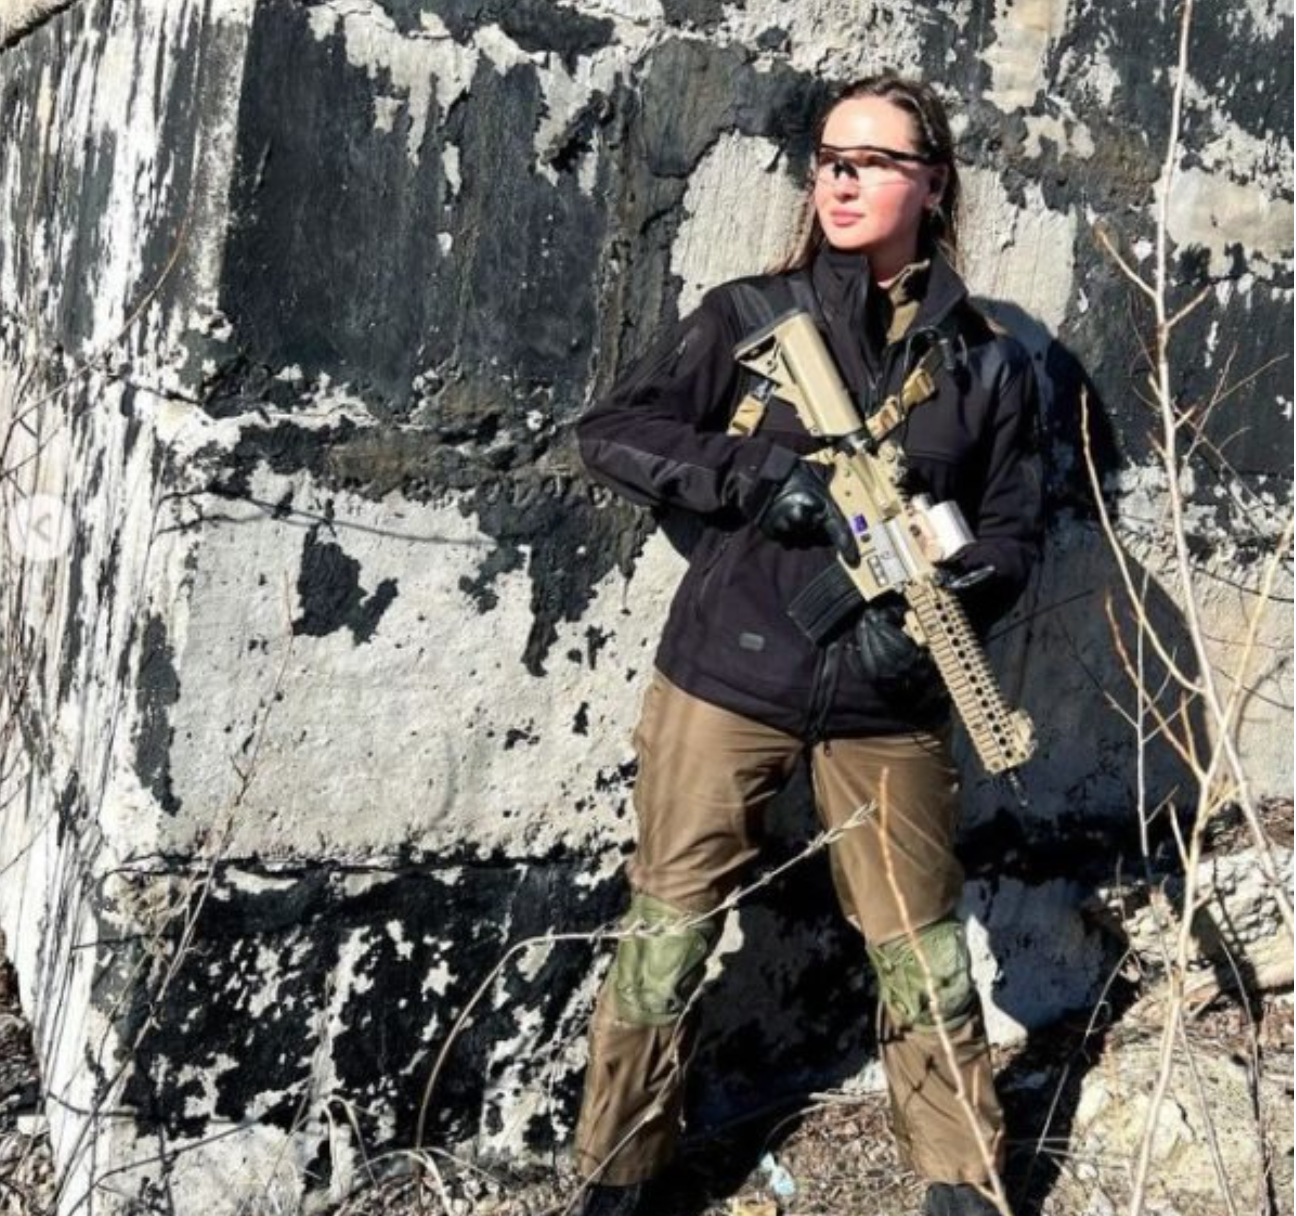 Ukrainian Beauty Queen Joins Fight Against Russian Invasion (If Looks Could Kill…)